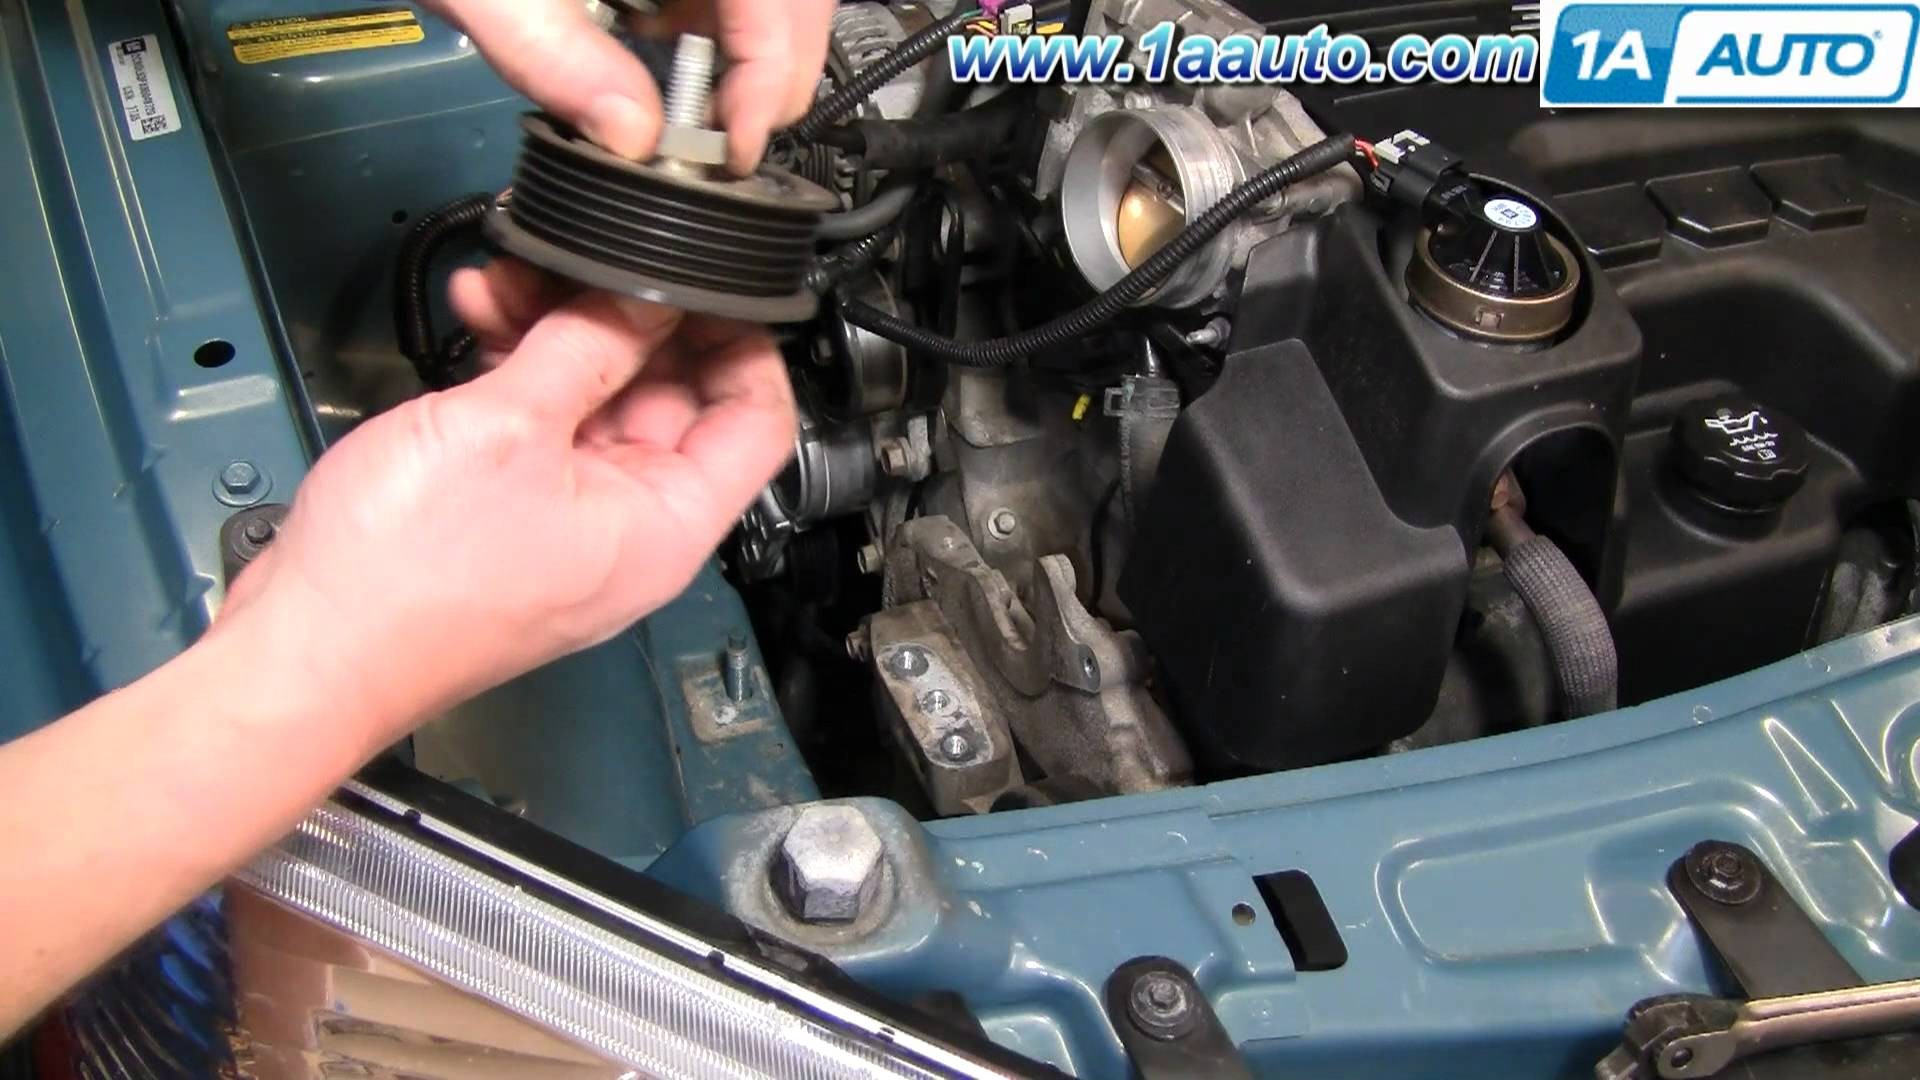 2007 Chevy Equinox Engine Diagram How to Install Replace Upper Idler Pulley Chevy Equinox 3 4l 05 09